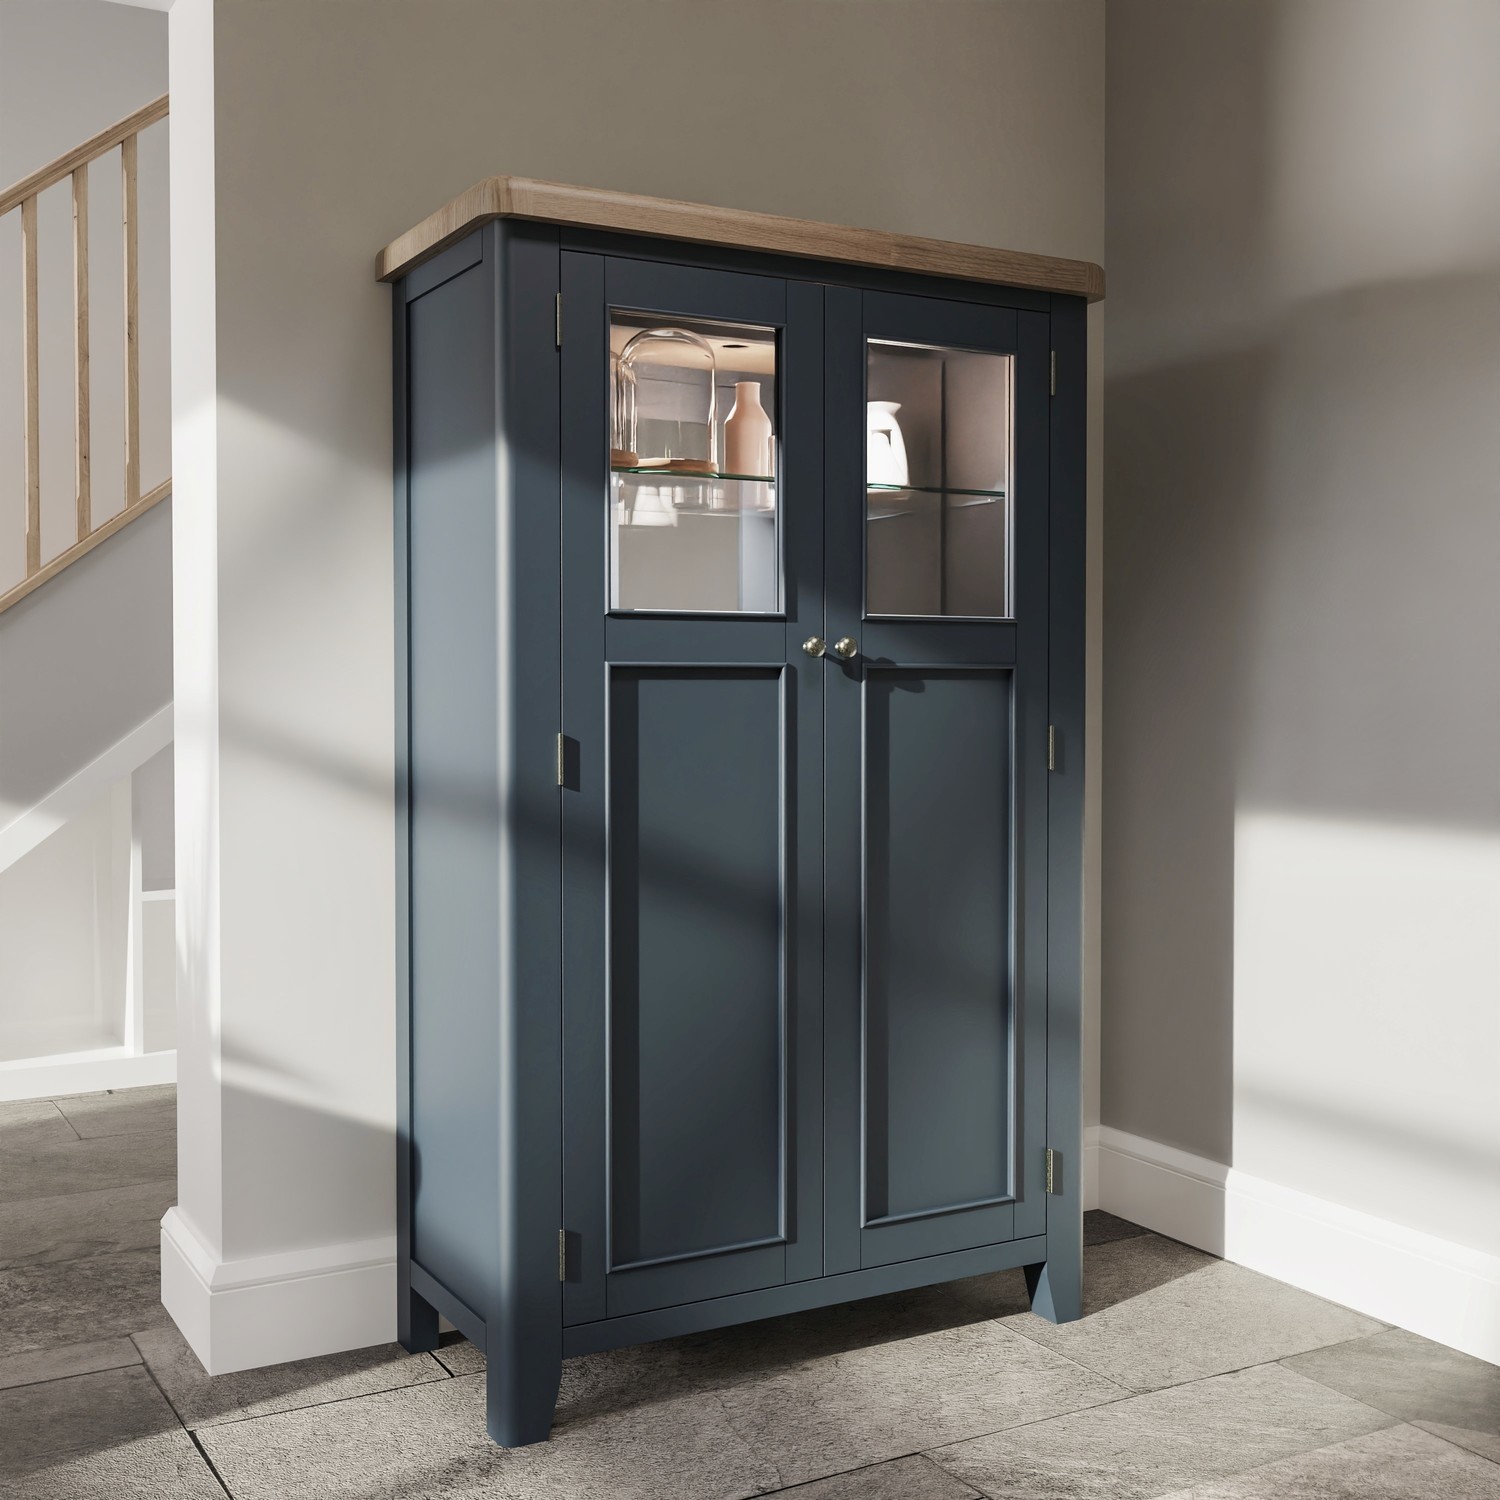 Read more about Navy & oak drinks cabinet pegasus